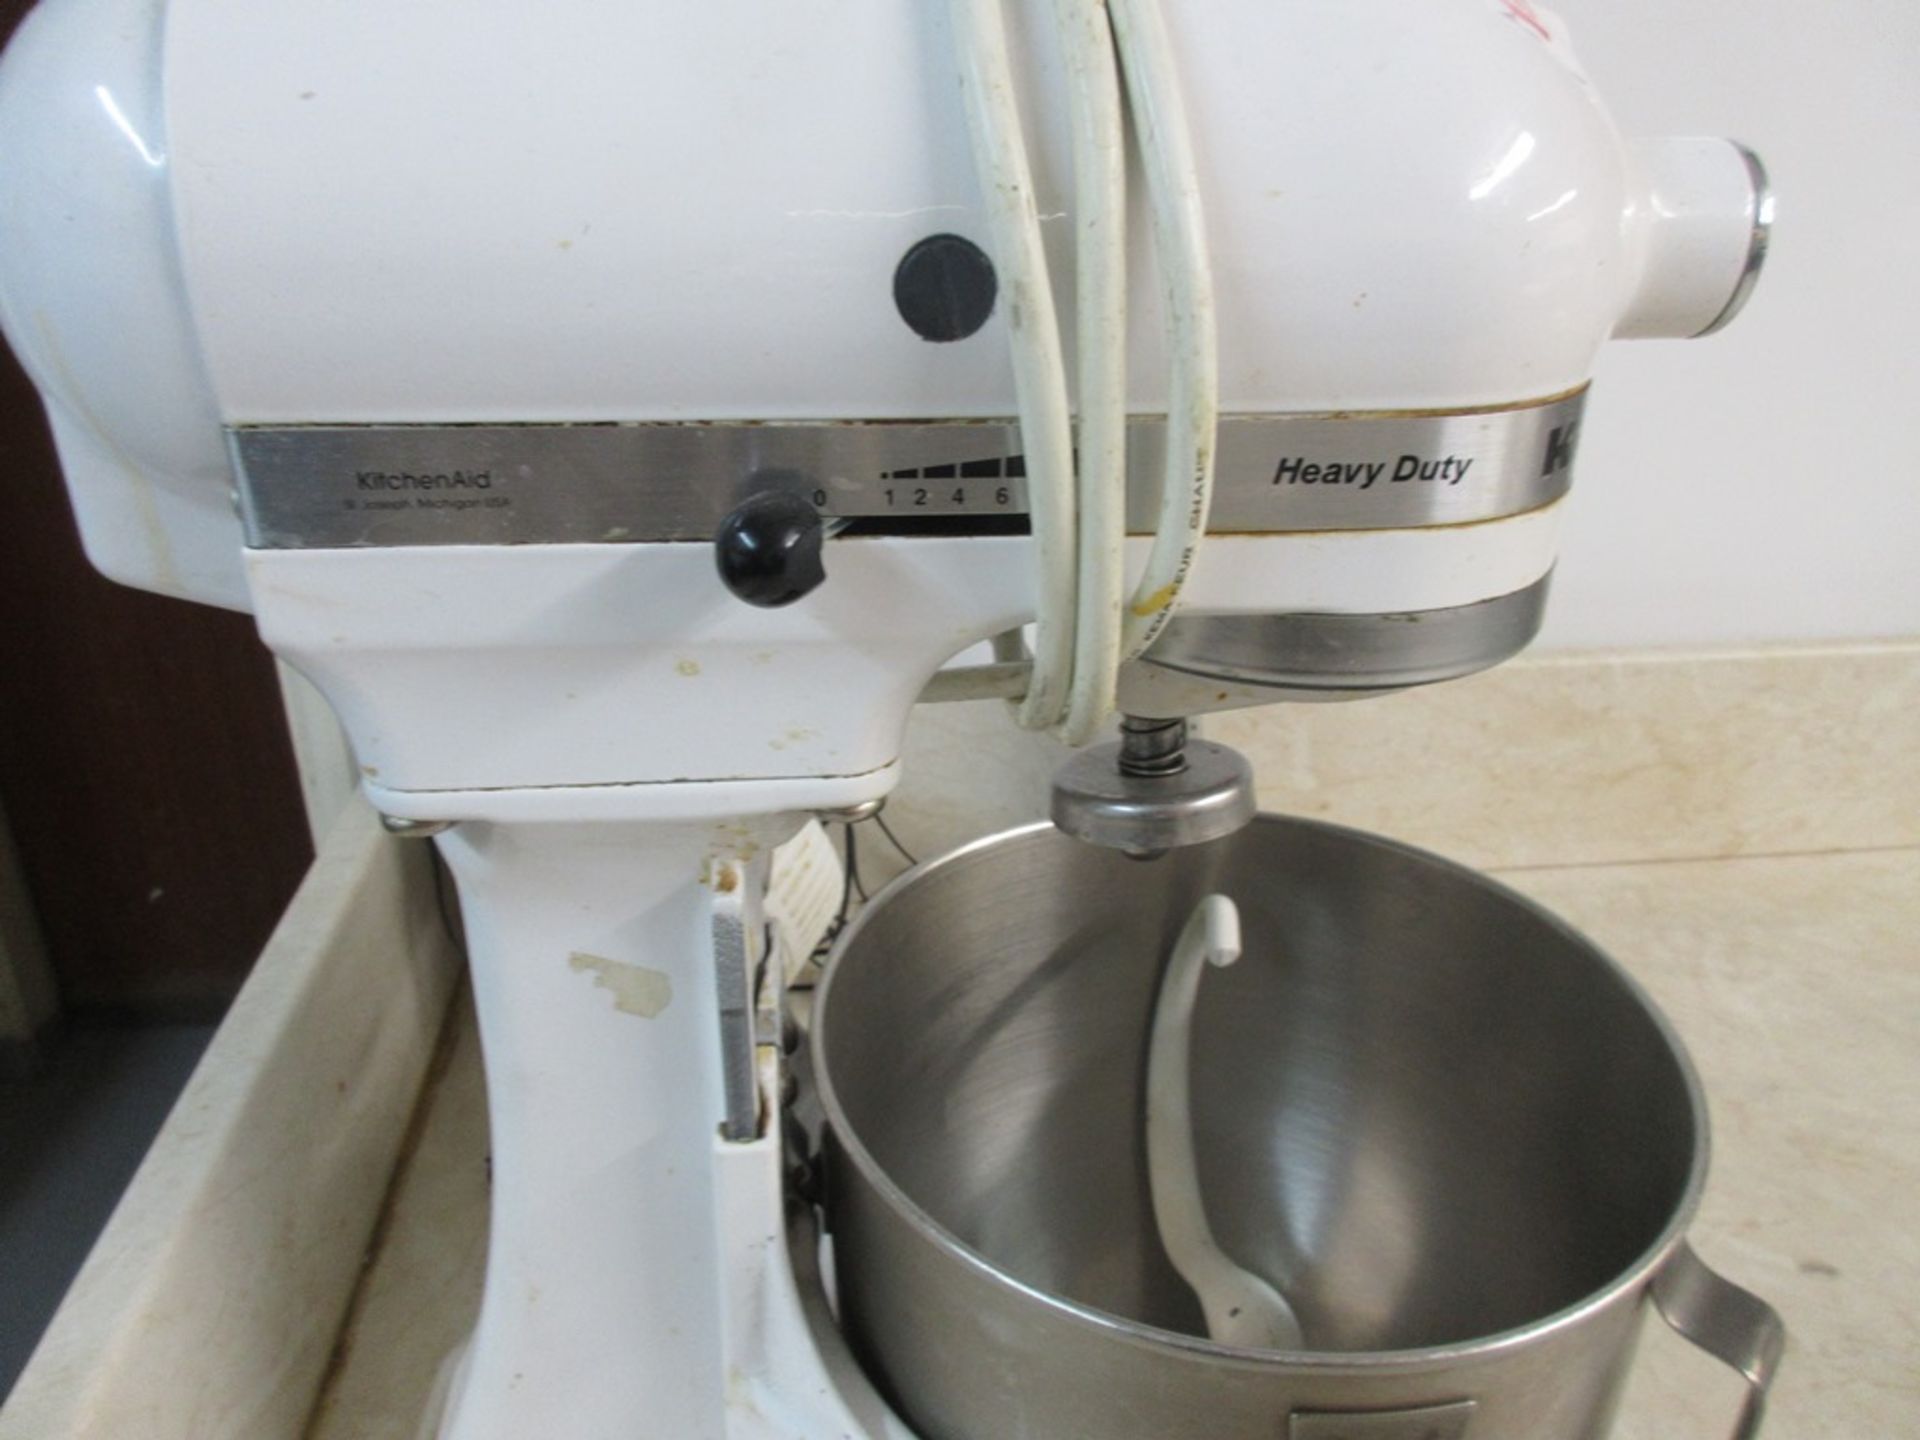 KitchenAid Heavy Duty bench top mixer, model 5KPMS and Station dial bench top weighing scales 44Ib x - Image 3 of 6